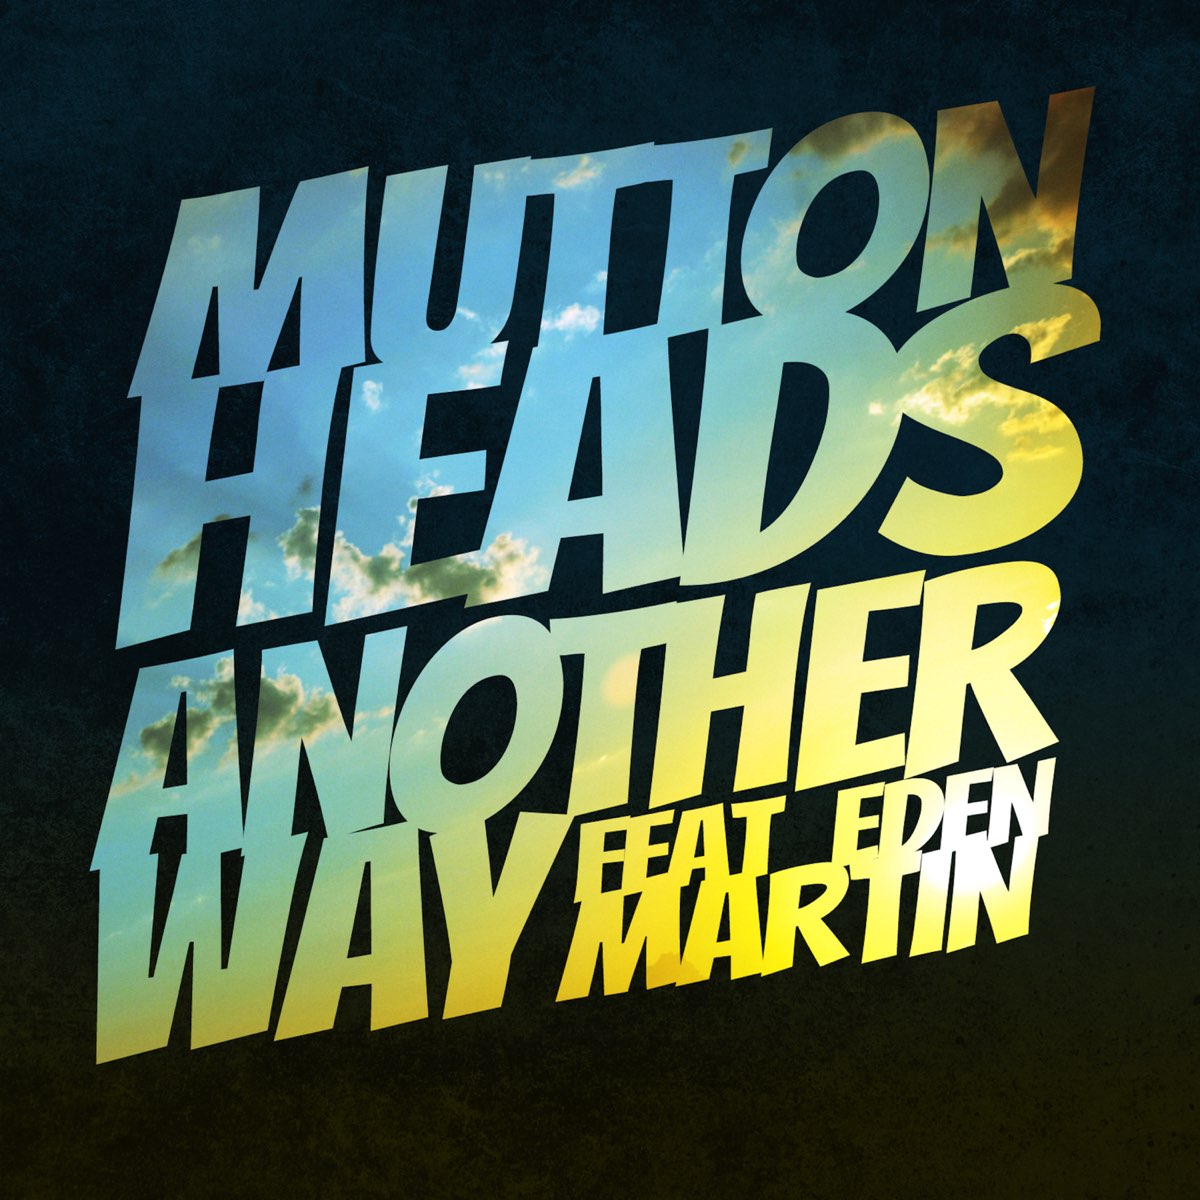 This another way. Muttonheads & Eden Martin. Muttonheads can you hear the Night. Going Home another way. Muttonheads can you hear the Night Cover.